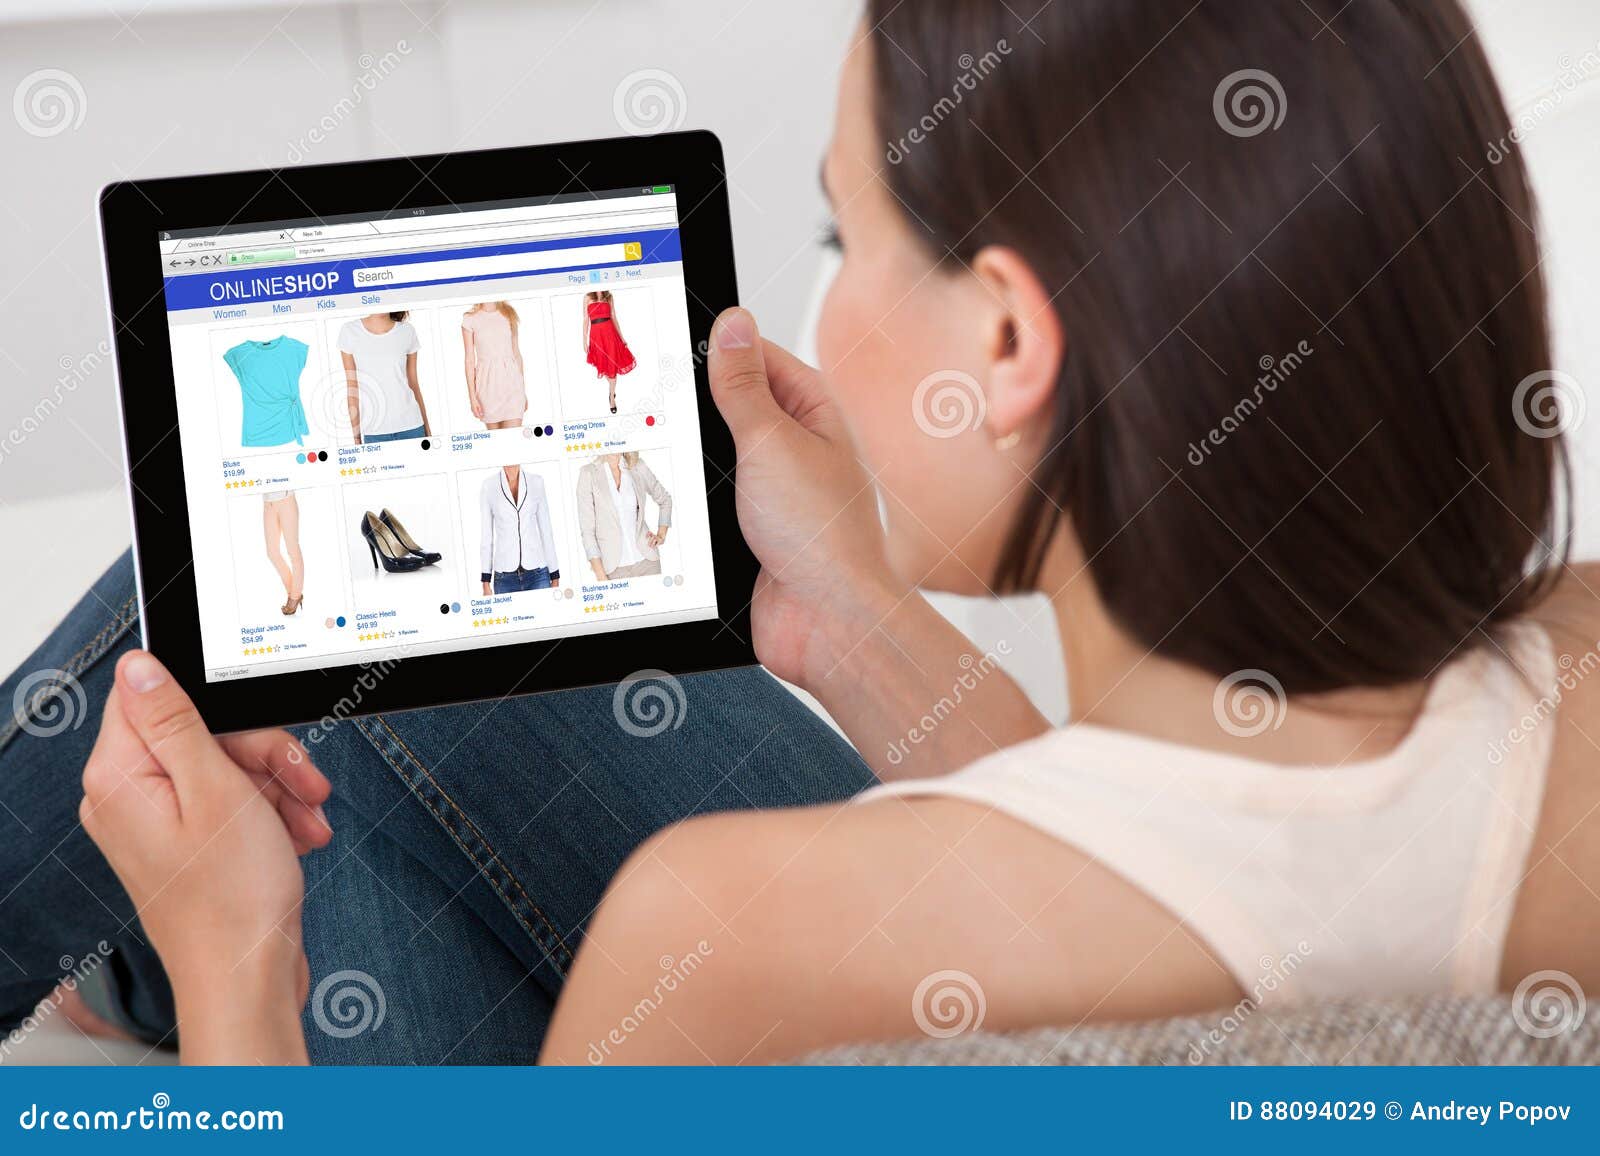 woman doing online shopping on digital tablet